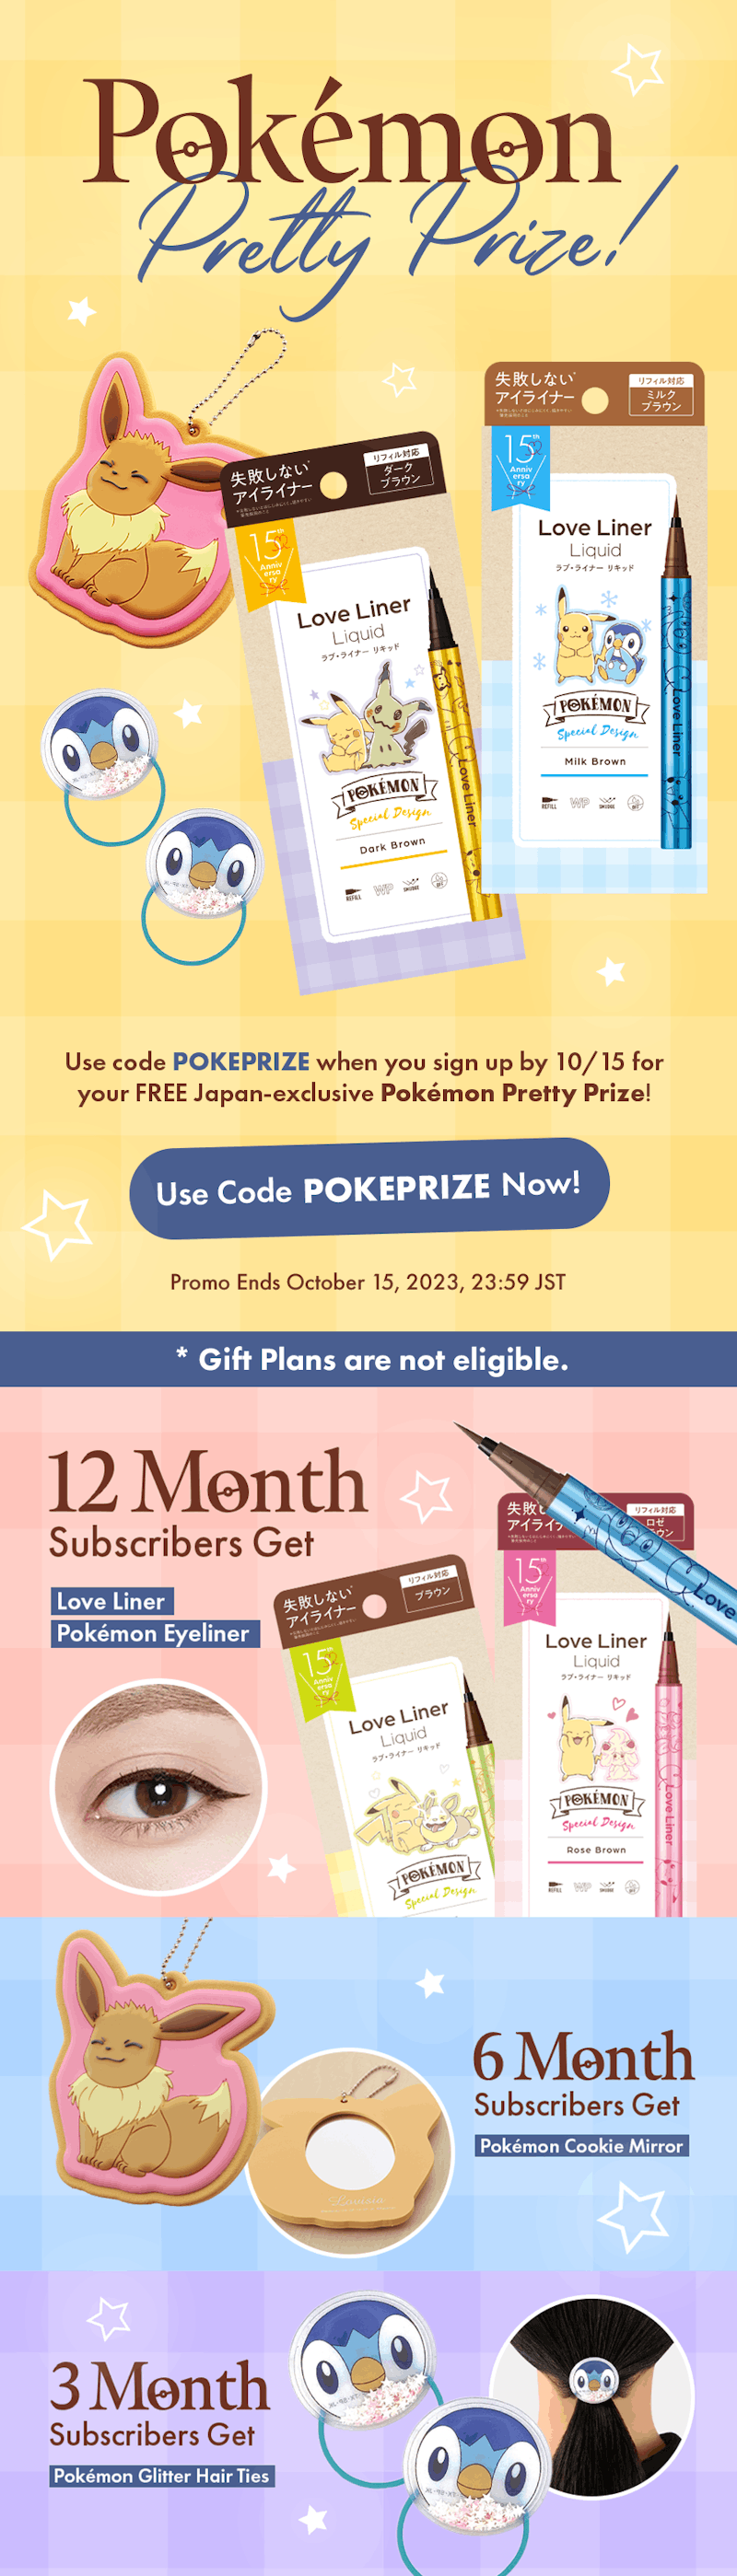 nomakenolife Use code POKEPRIZE when you sign up by 10/15 for your FREE Pokemon Pretty Prize 